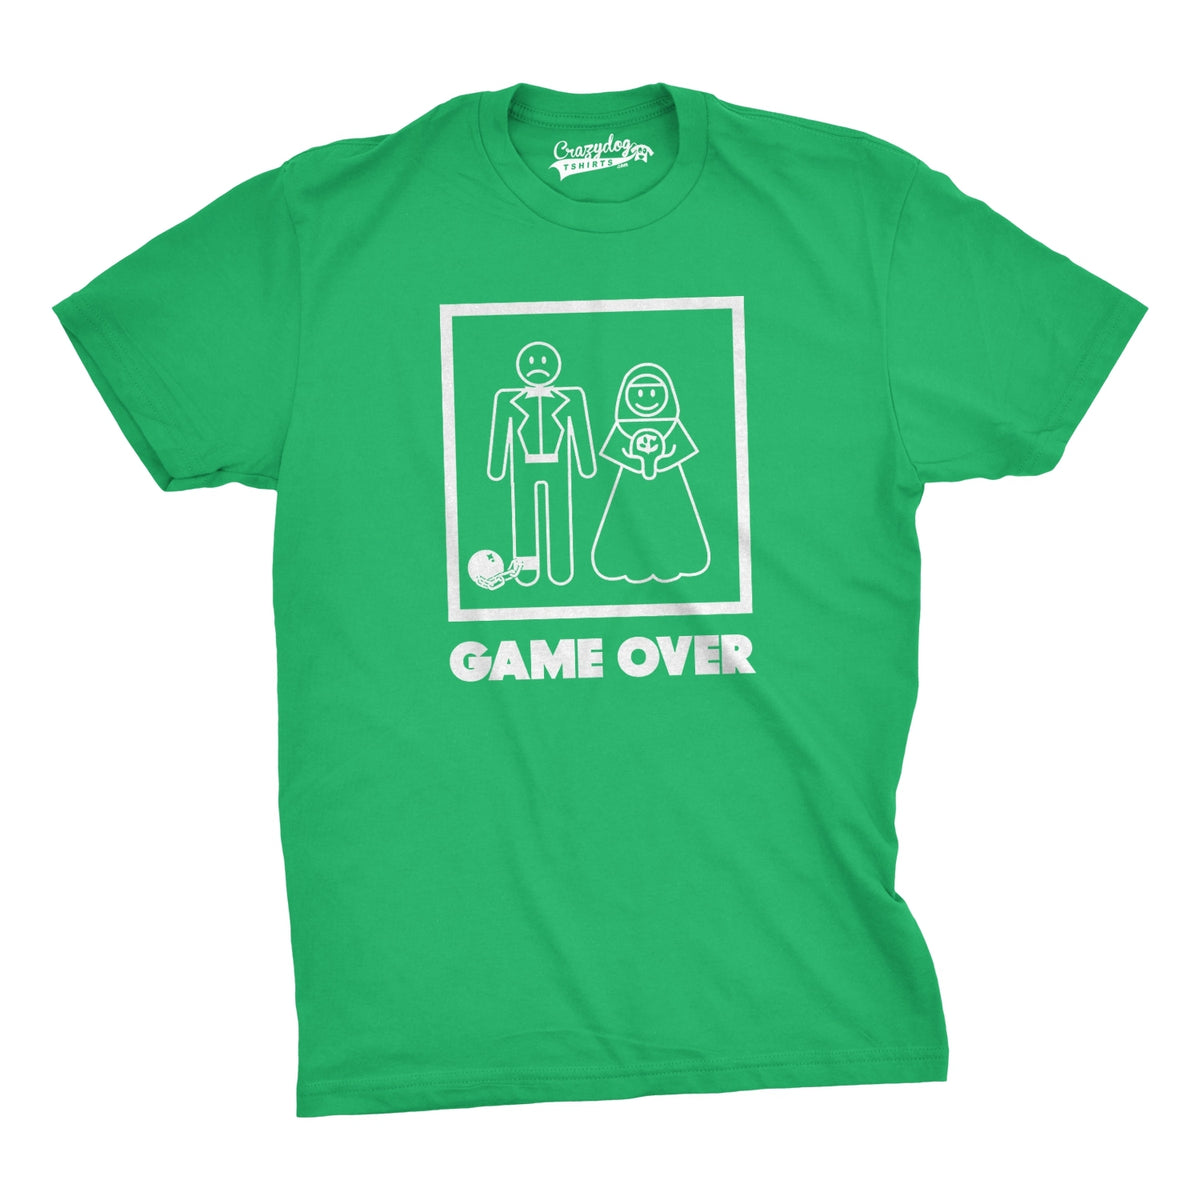 Funny Green Game Over Mens T Shirt Nerdy Video Games Wedding Tee